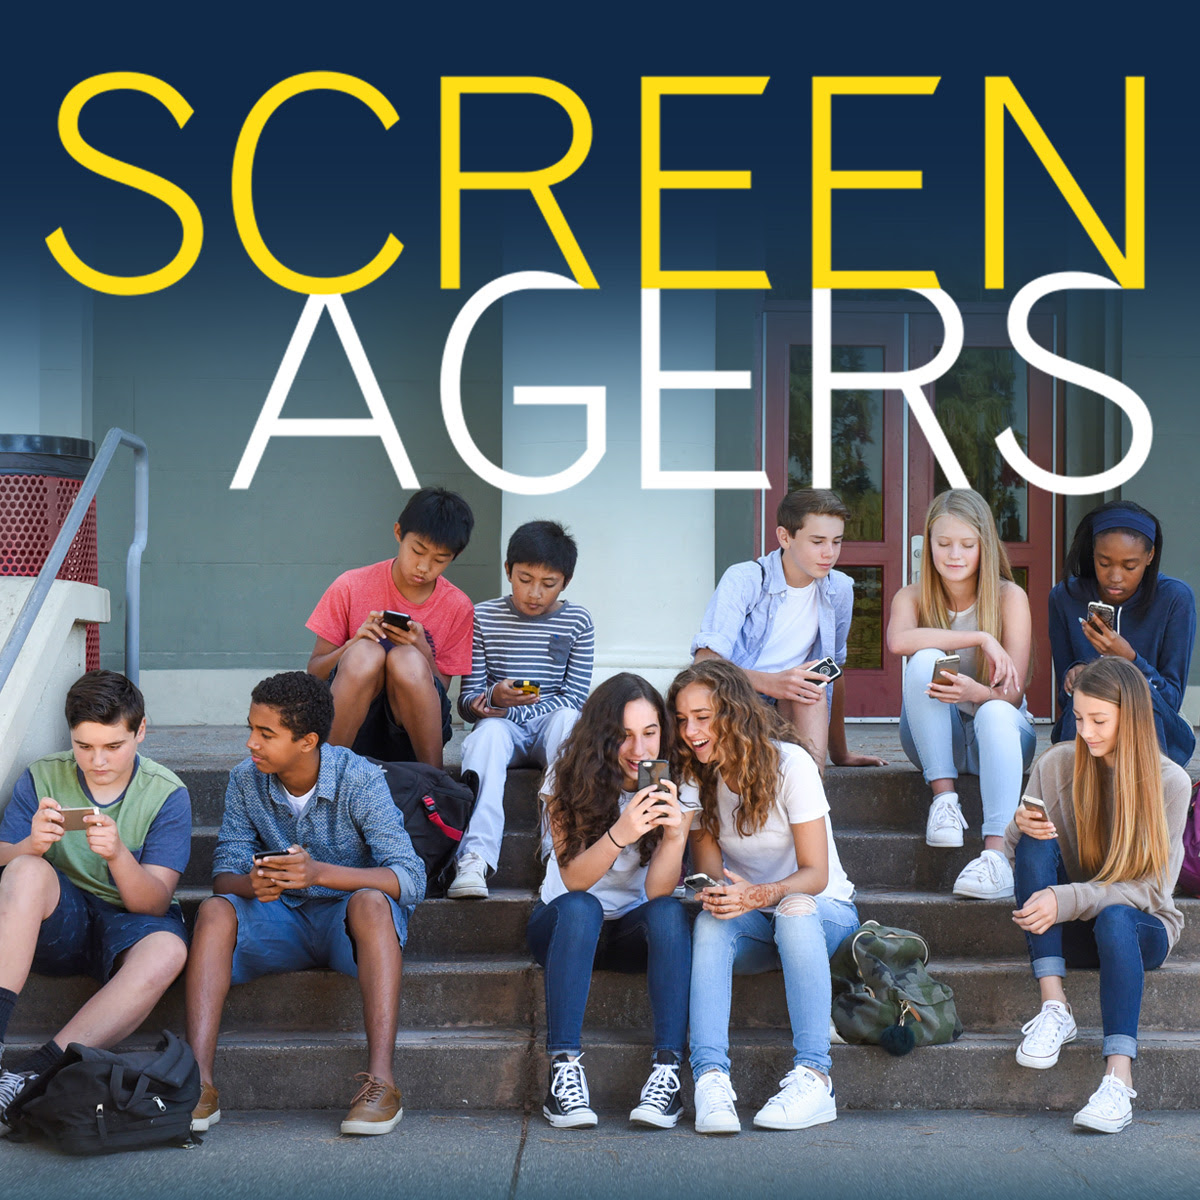 Screenagers Film Presented By Citizens of the World Silver Lake